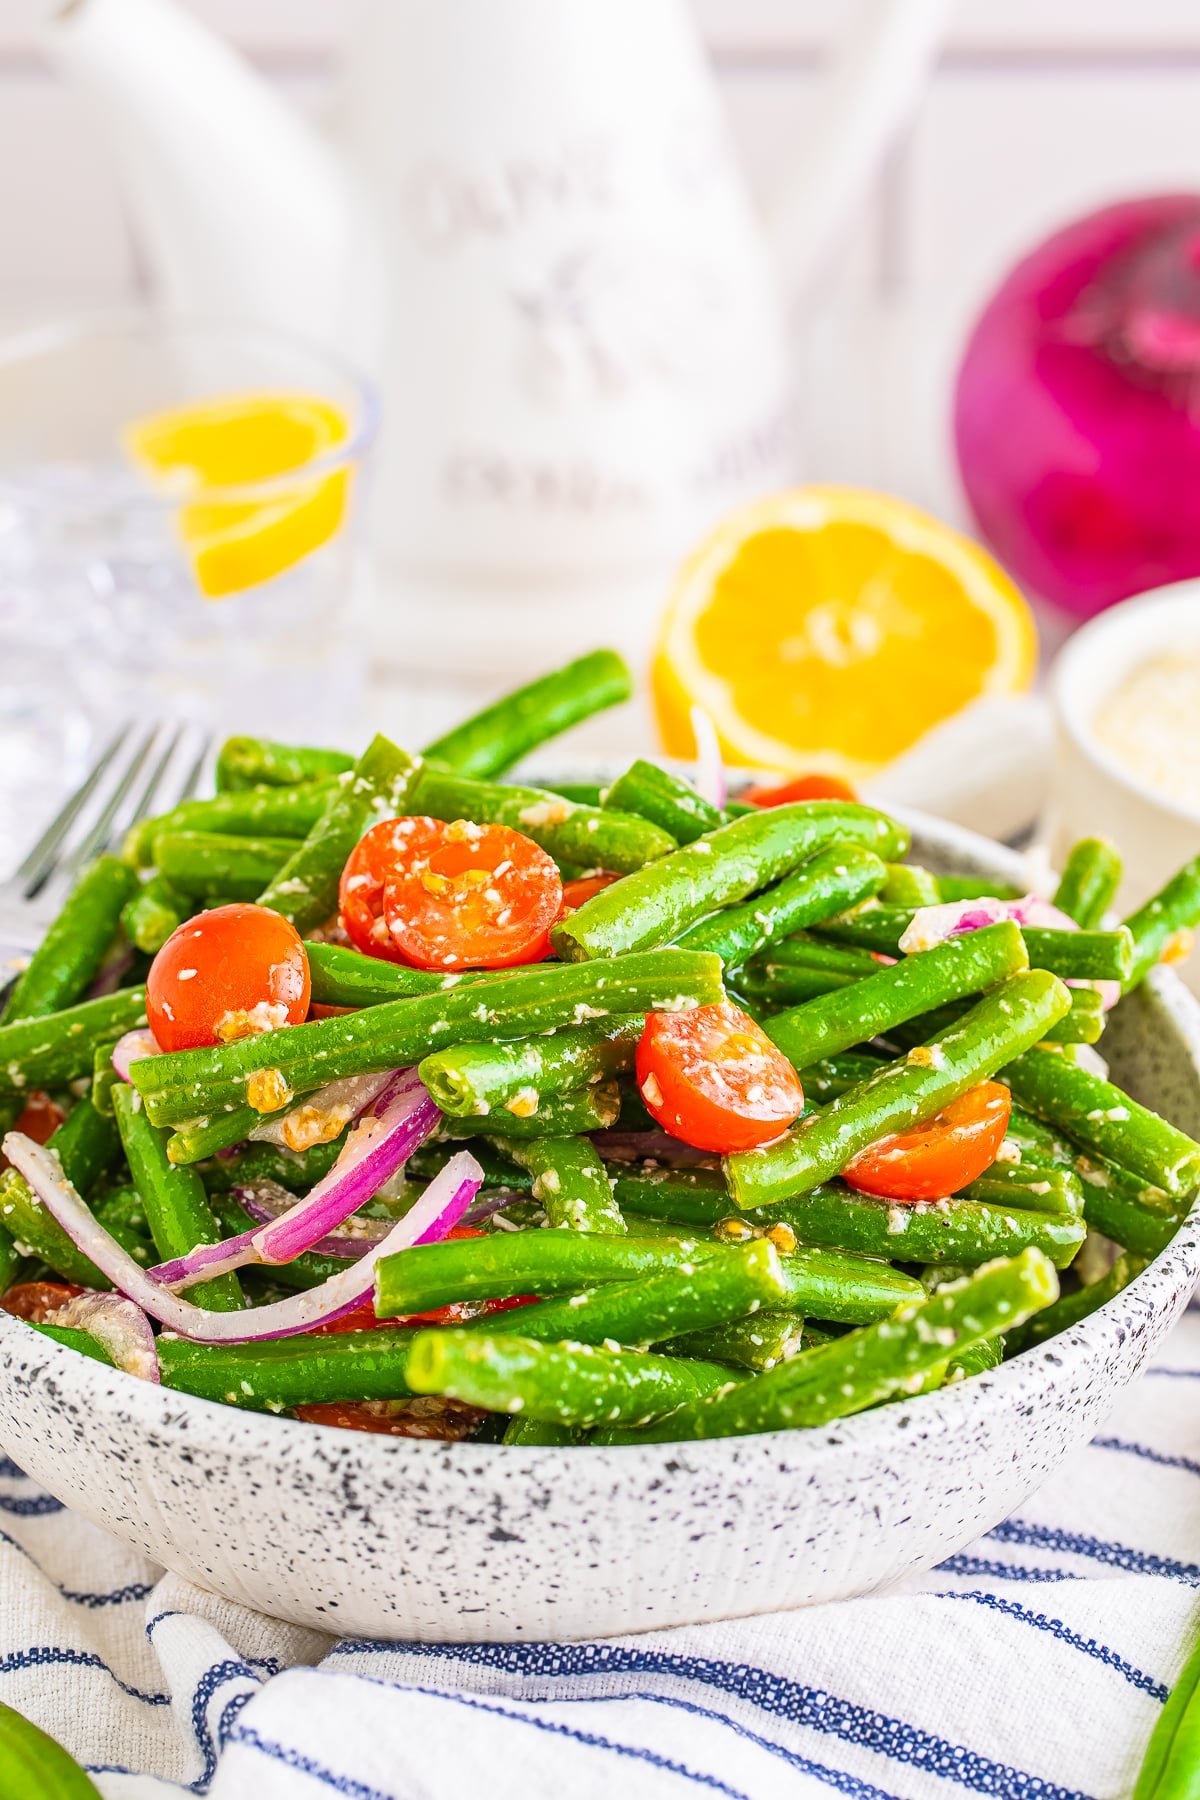 45 degree angle shot showing cold green bean salad in a speckled bowl